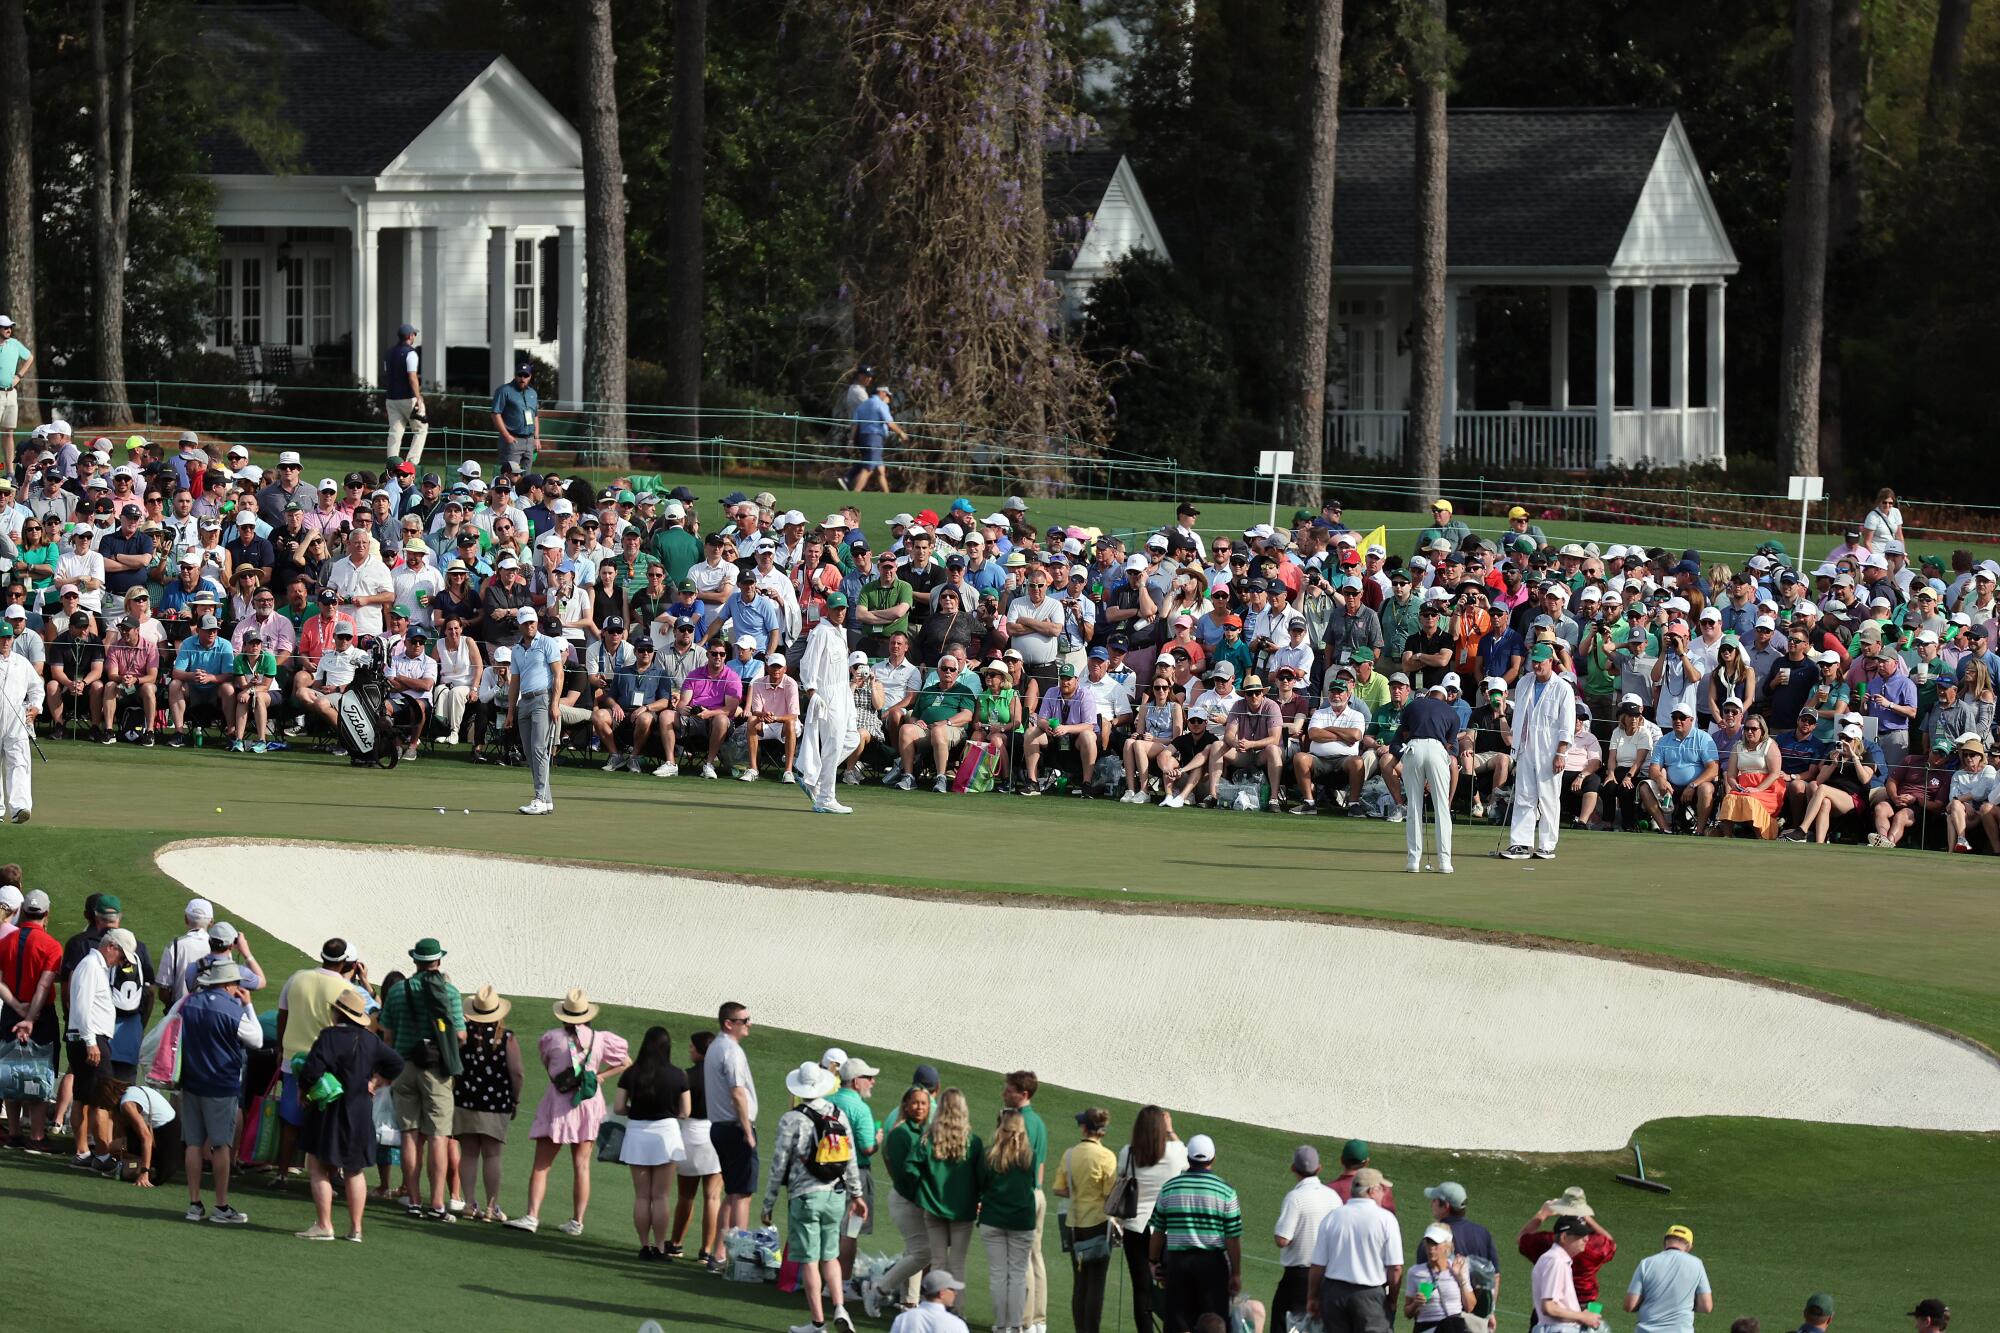 Golfers stand on the green as a large crowd looks on